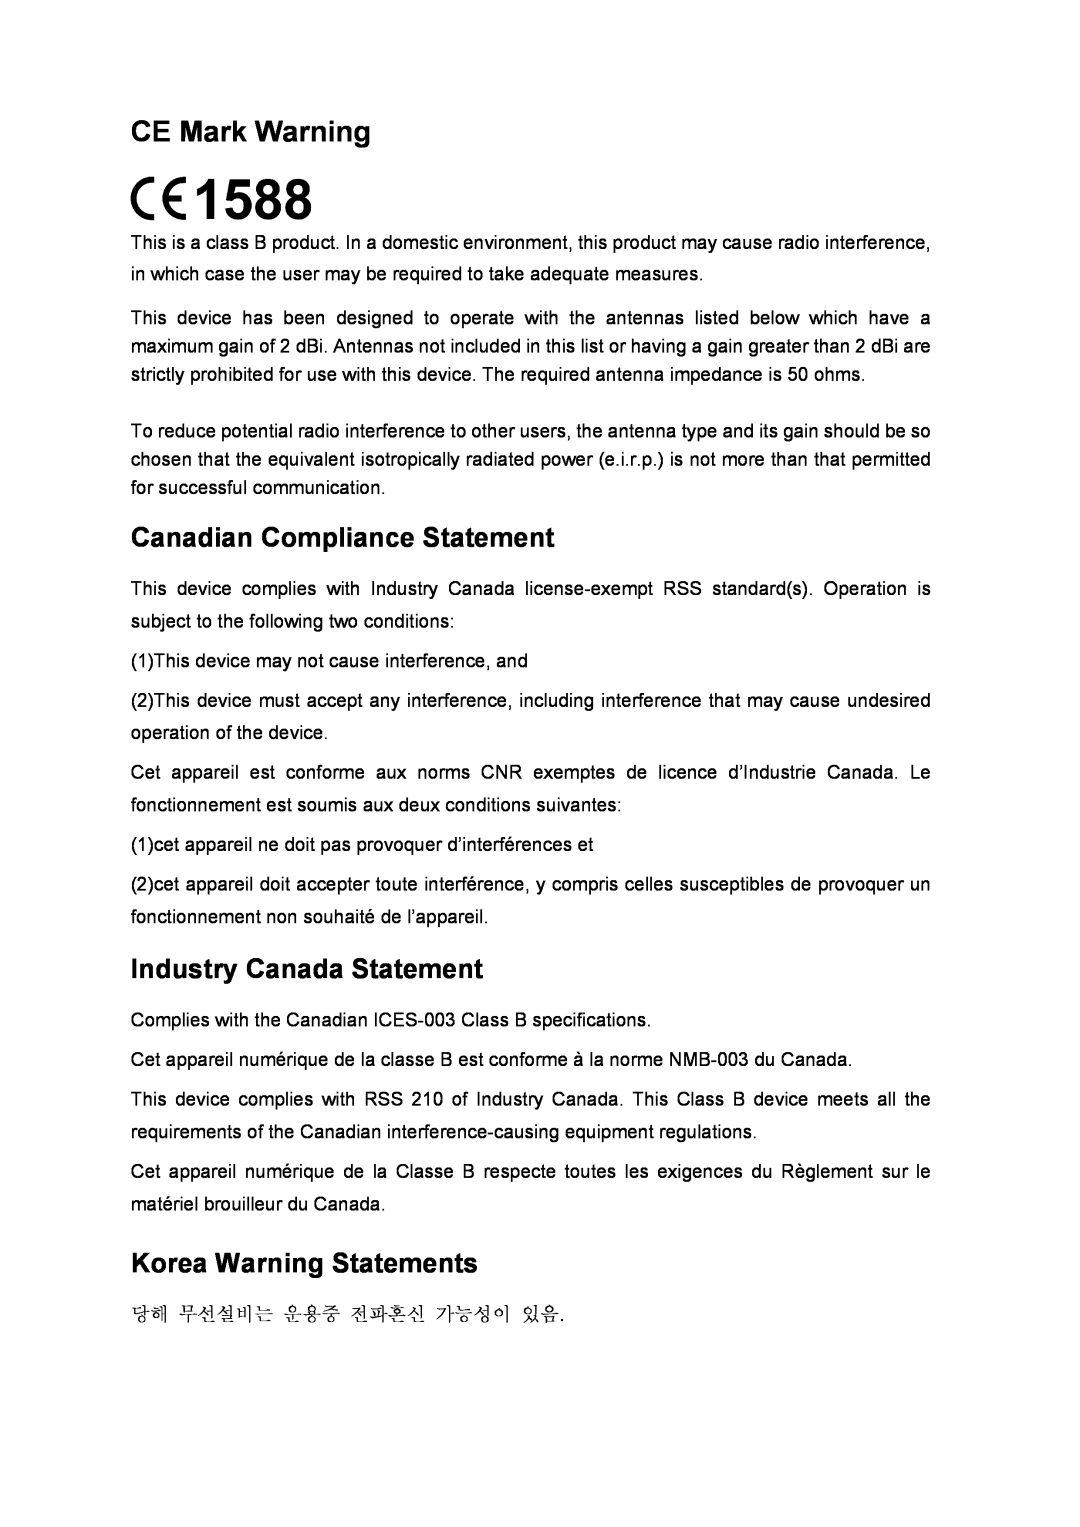 TP-Link TL-WN751N CE Mark Warning, Canadian Compliance Statement, Industry Canada Statement, Korea Warning Statements 